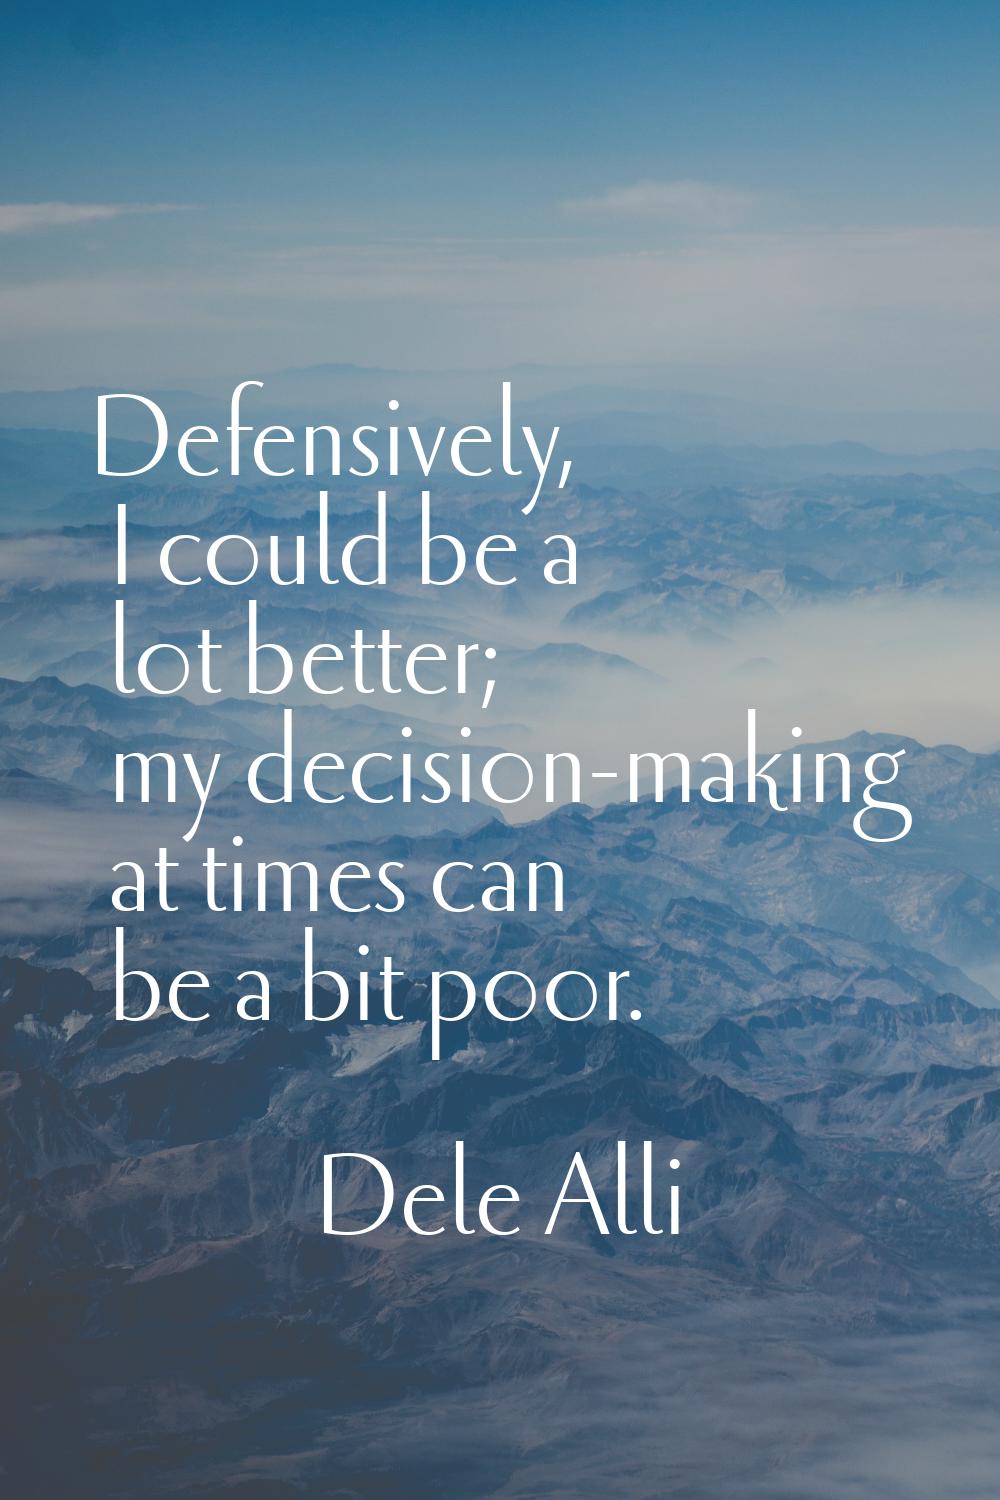 Defensively, I could be a lot better; my decision-making at times can be a bit poor.